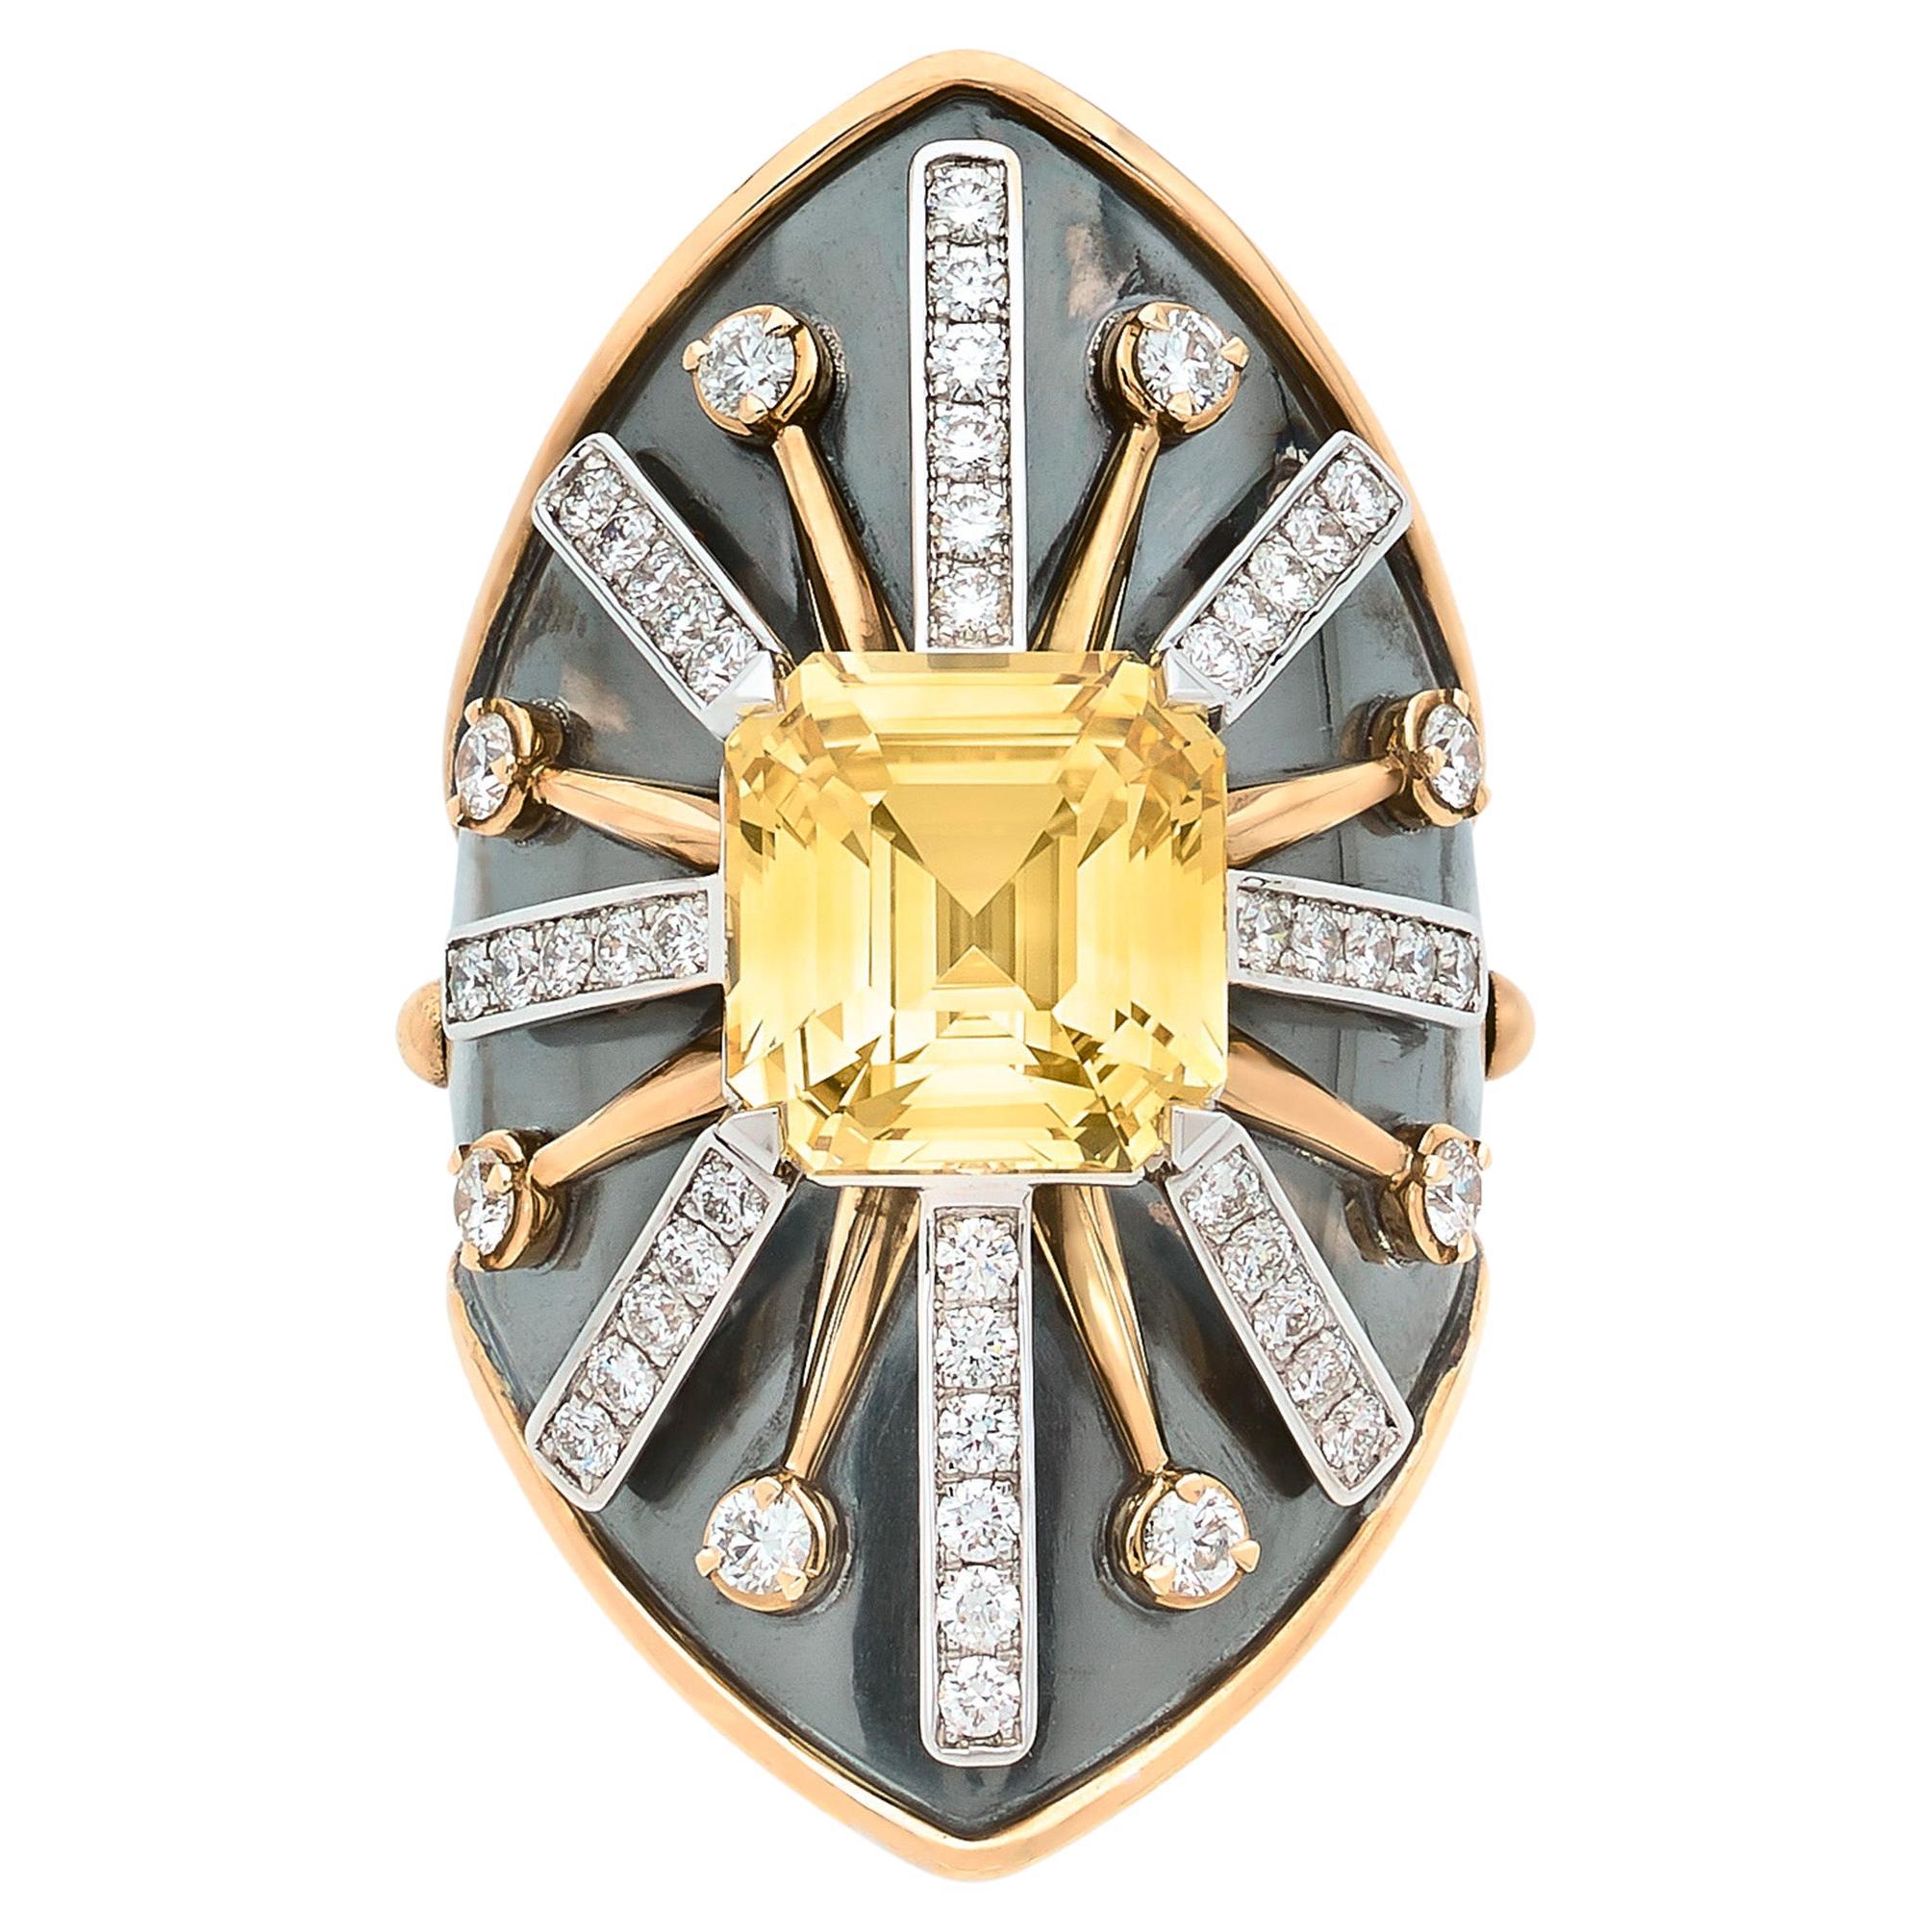 Yellow Sapphire & Diamond Ecu Ring in 18k Gold by Elie Top